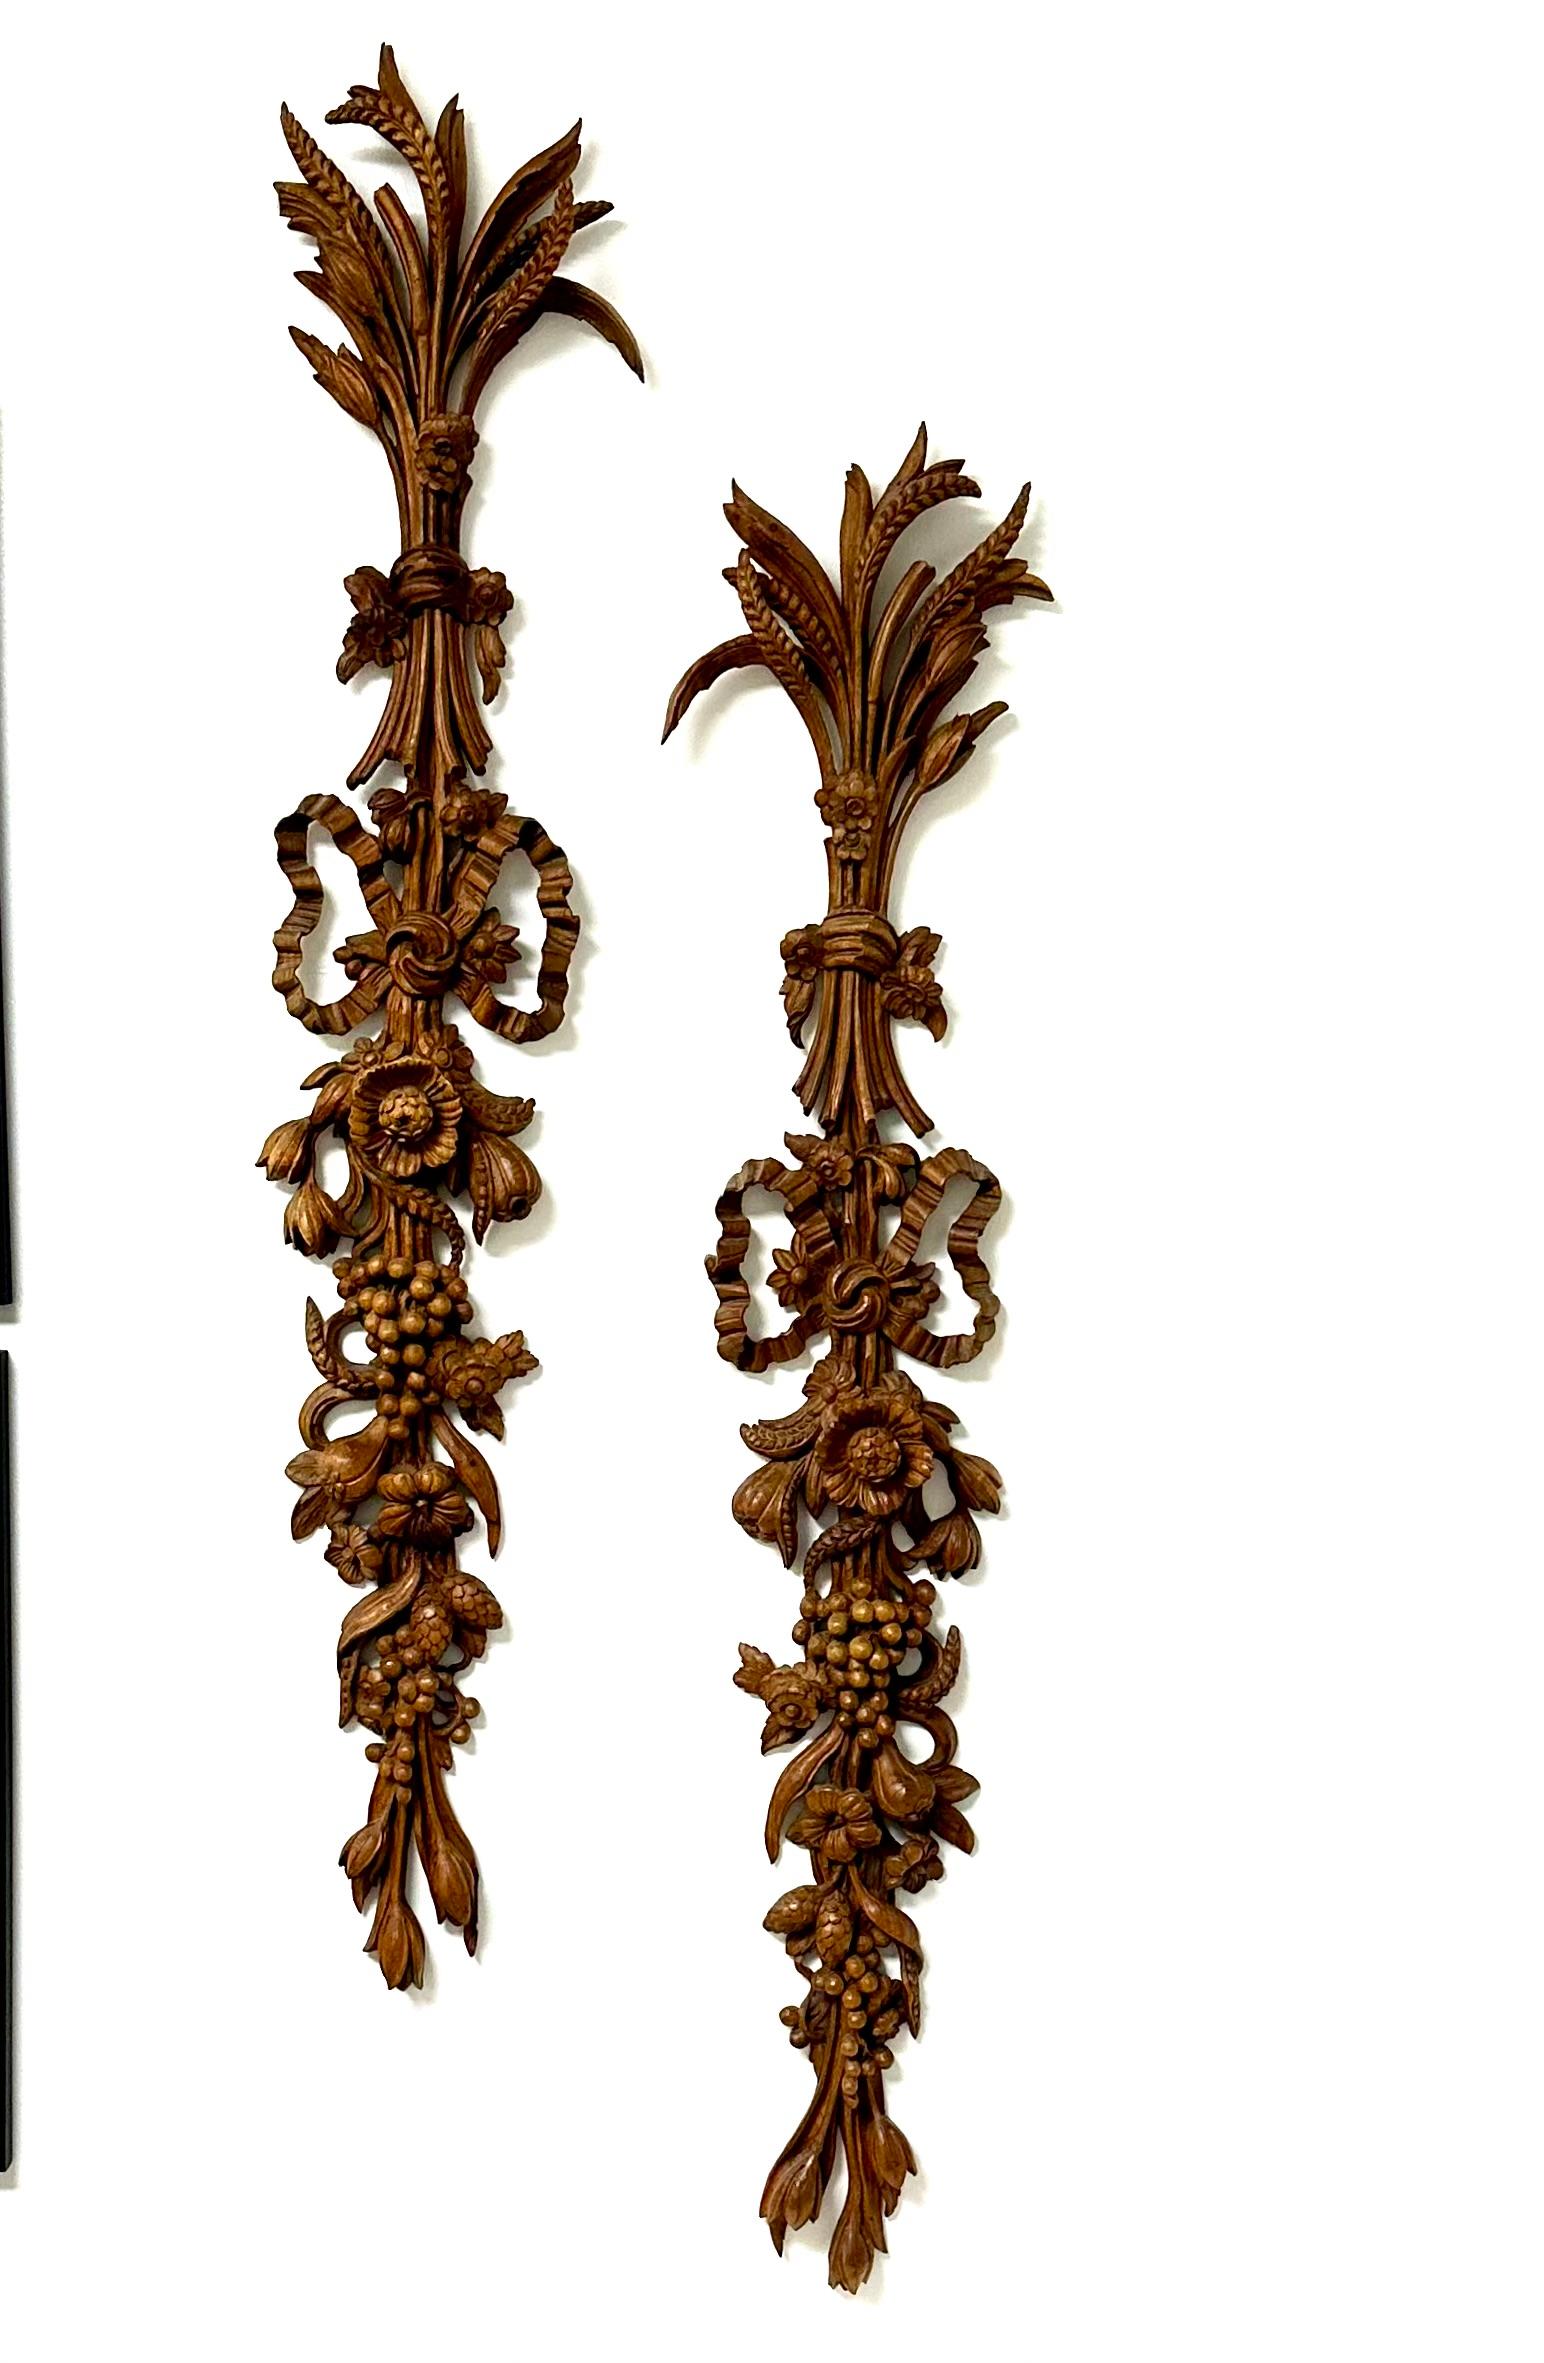 A pair of Fruitwood carved Italian bouquet of flowers wall hangings. With wheat grapes and assorted other fruit, eight types of flowers and a large bow. Each with old tags on the back. Circa 1890s .They have a couple of chipped leaves here and